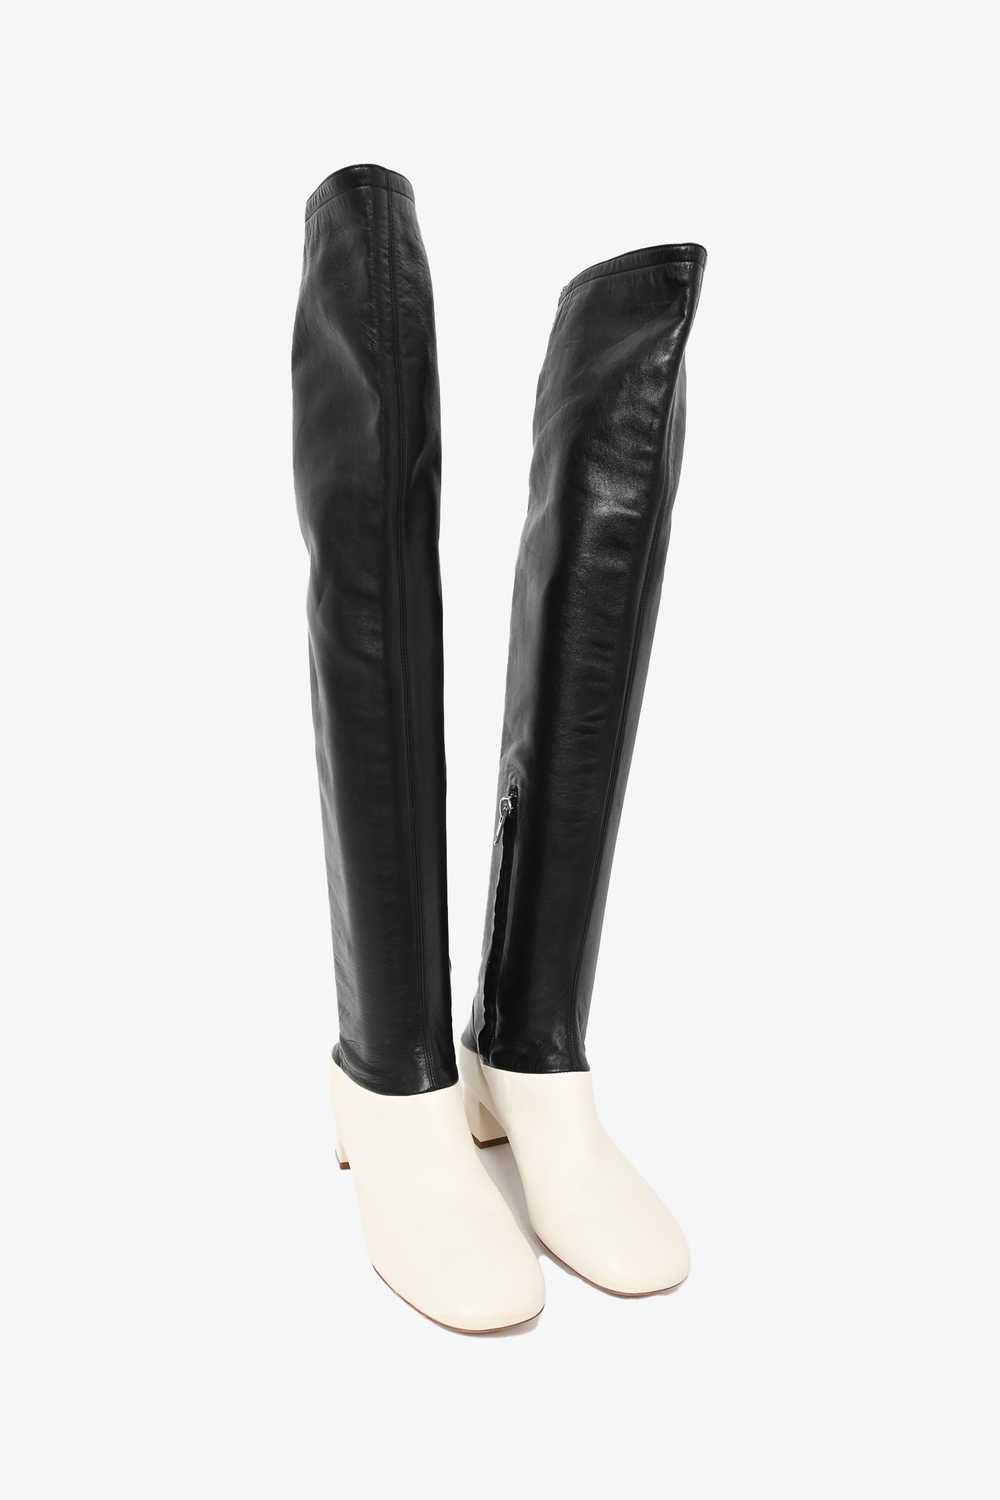 Celine Black/White Leather Knee High Boots Size 36 - image 2